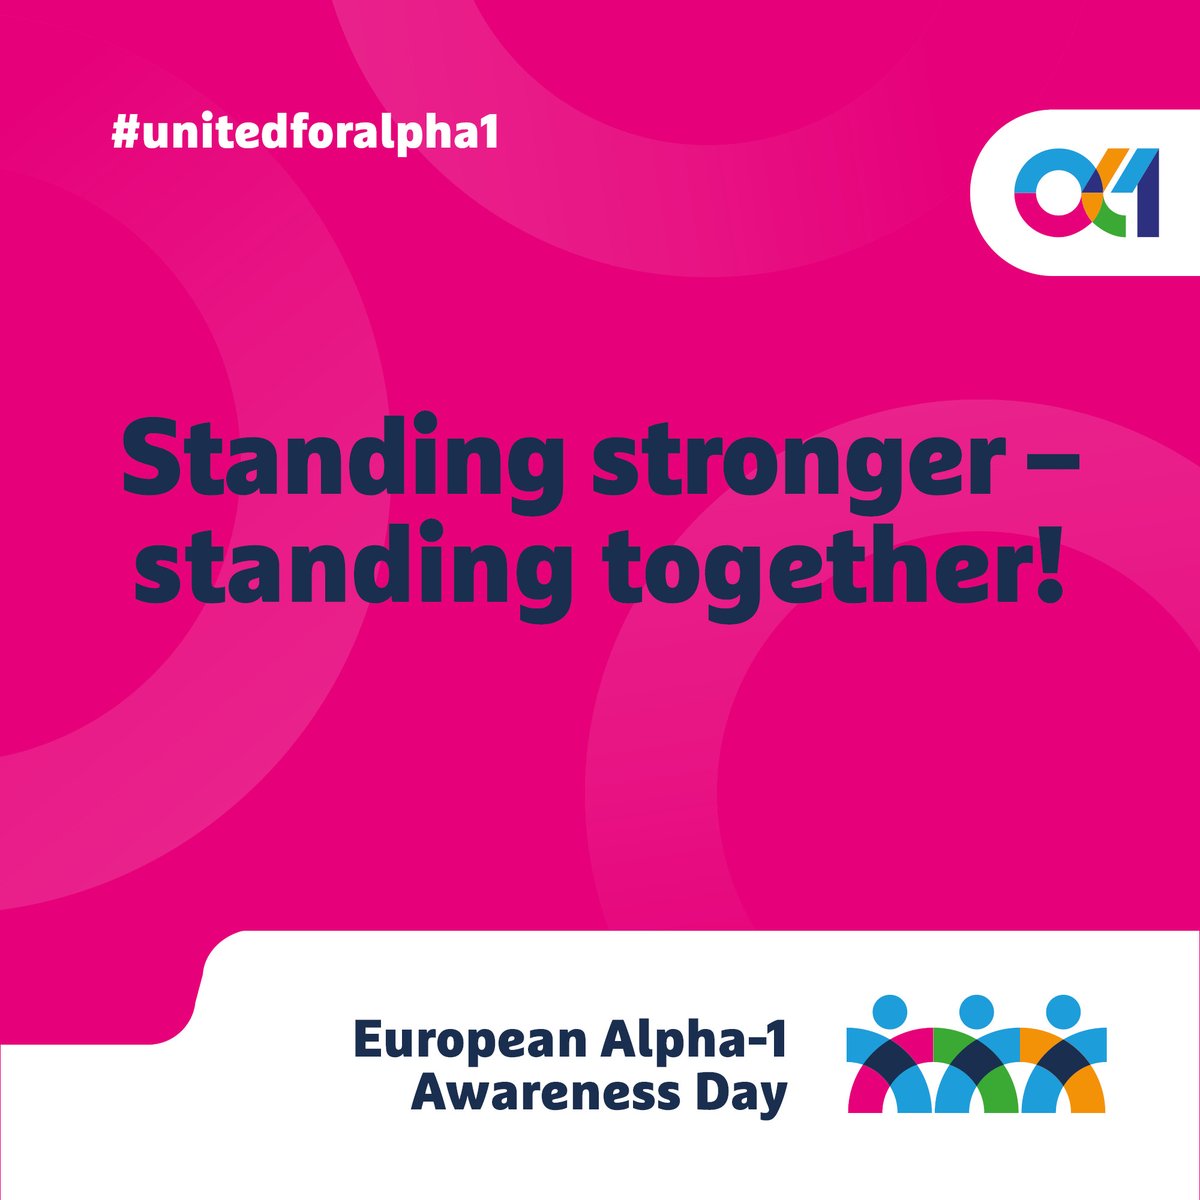 Join us today in improving the lives of alpha-1 patients and their families!

alpha1europe.org/national-organ…

#unitedforalpha1 #EuropeanAlpha1AwarenessDay #alpha1awareness #AATD #alpha1antritrypsindeficiency #raredisease #alpha1testing  #mentalhealthmatters #mentalhealth #community